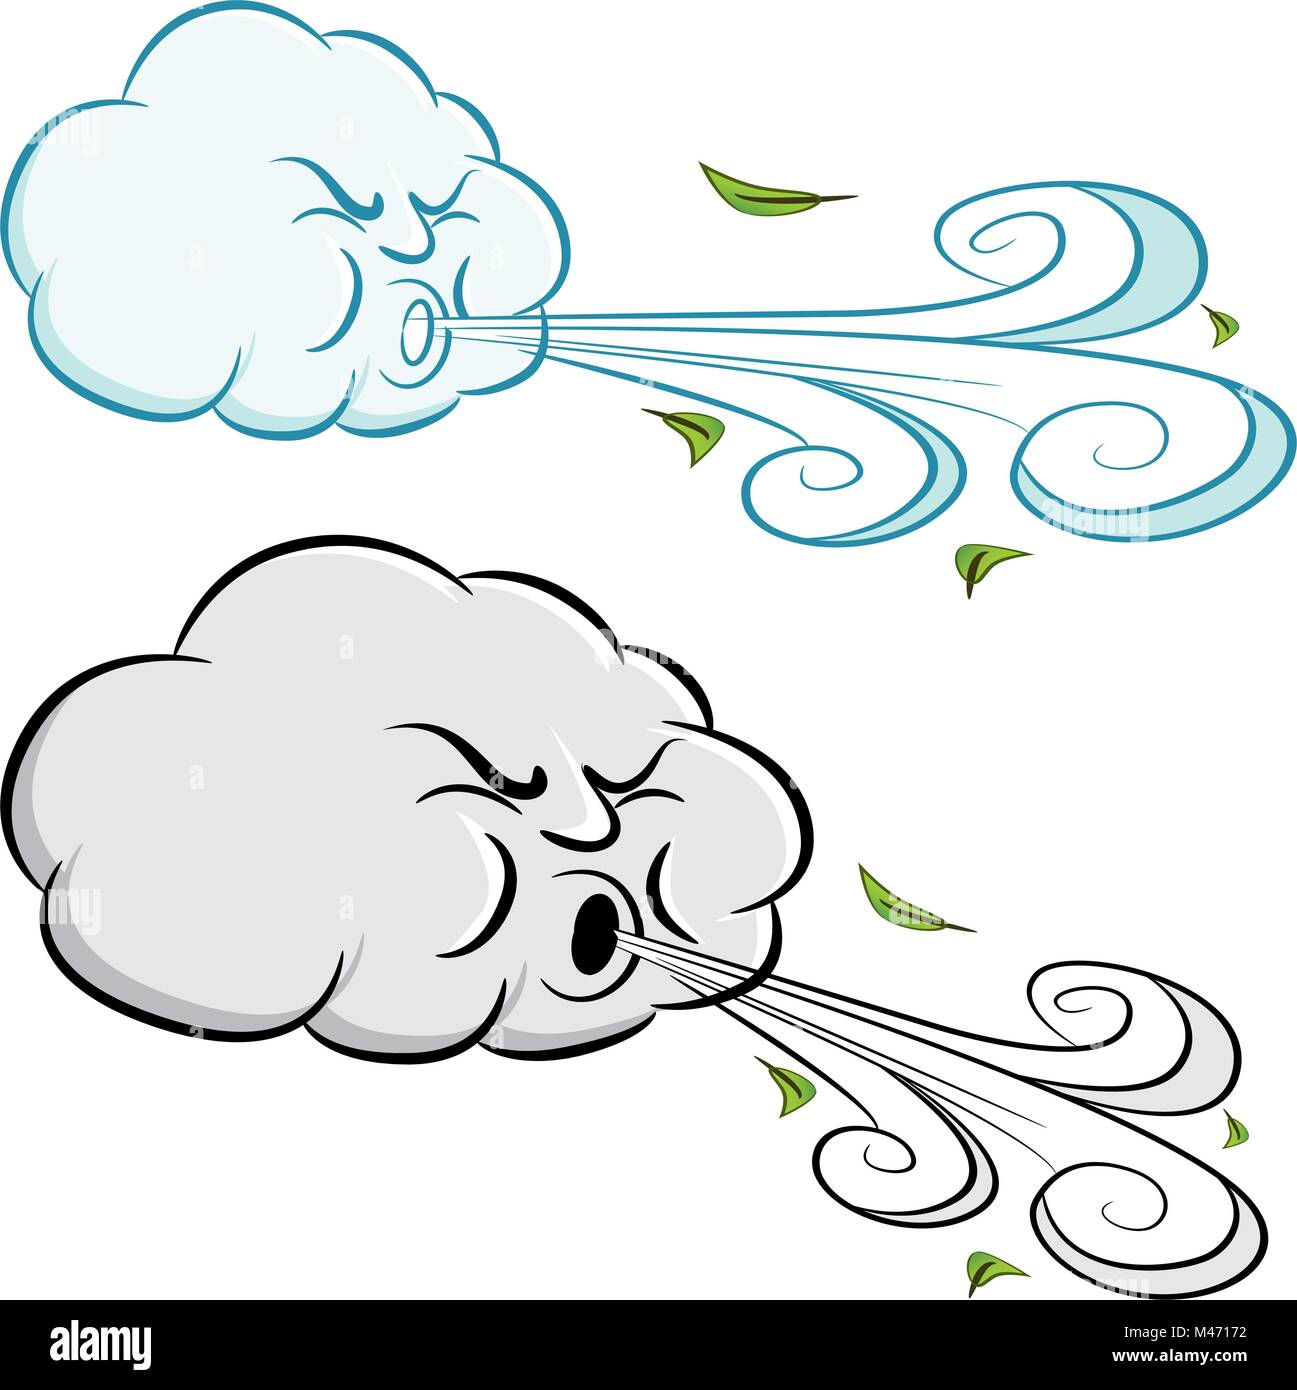 An image of a Windy Day Cloud Blowing Wind and Leaves. Stock Vector